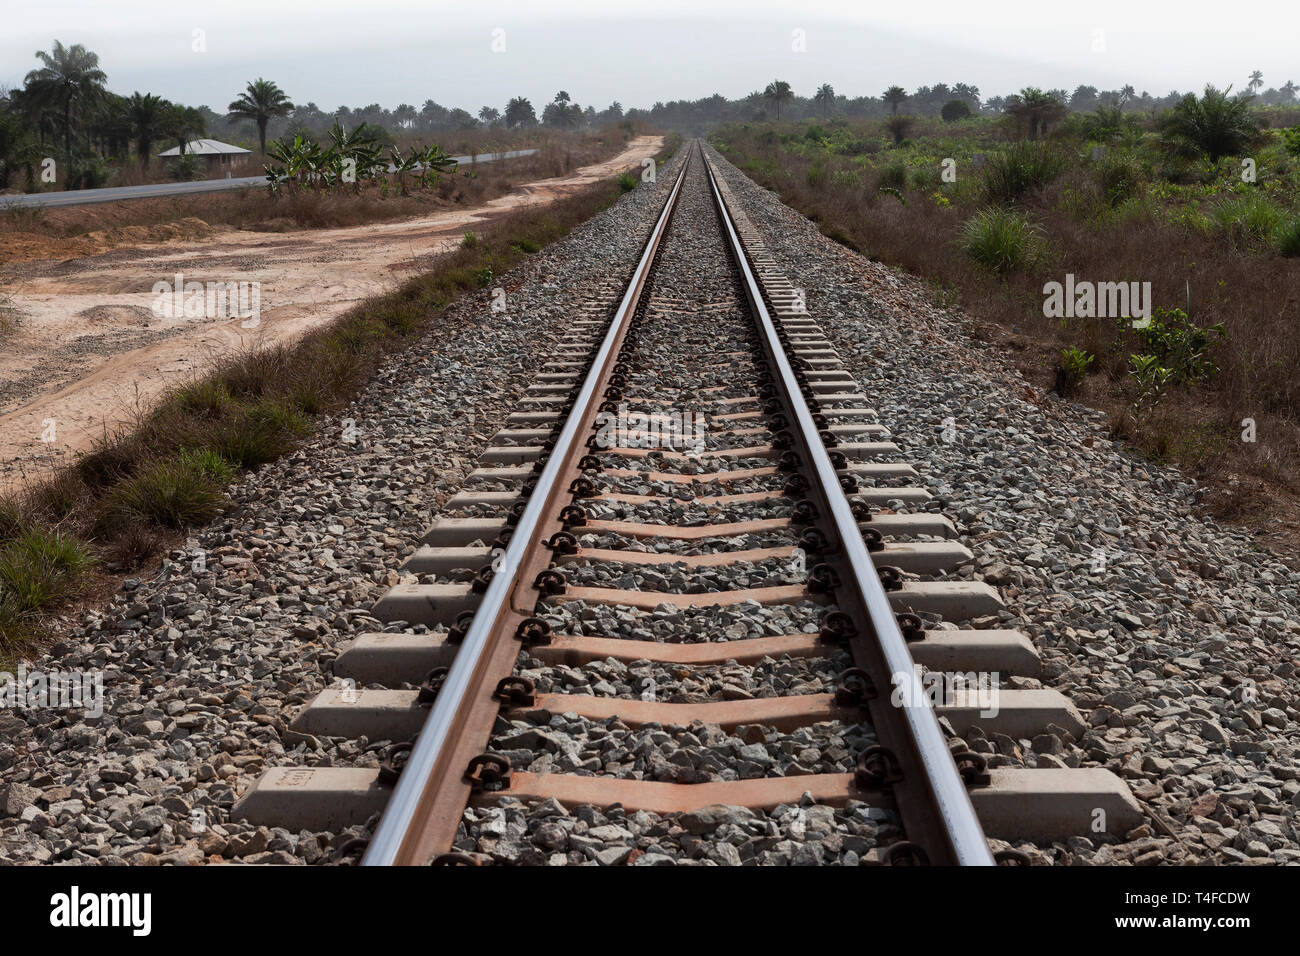 Rail & port operations for managing & transporting iron ore. Straightened and tampered rail track line curve - so cutting down ore train travel time. Stock Photo